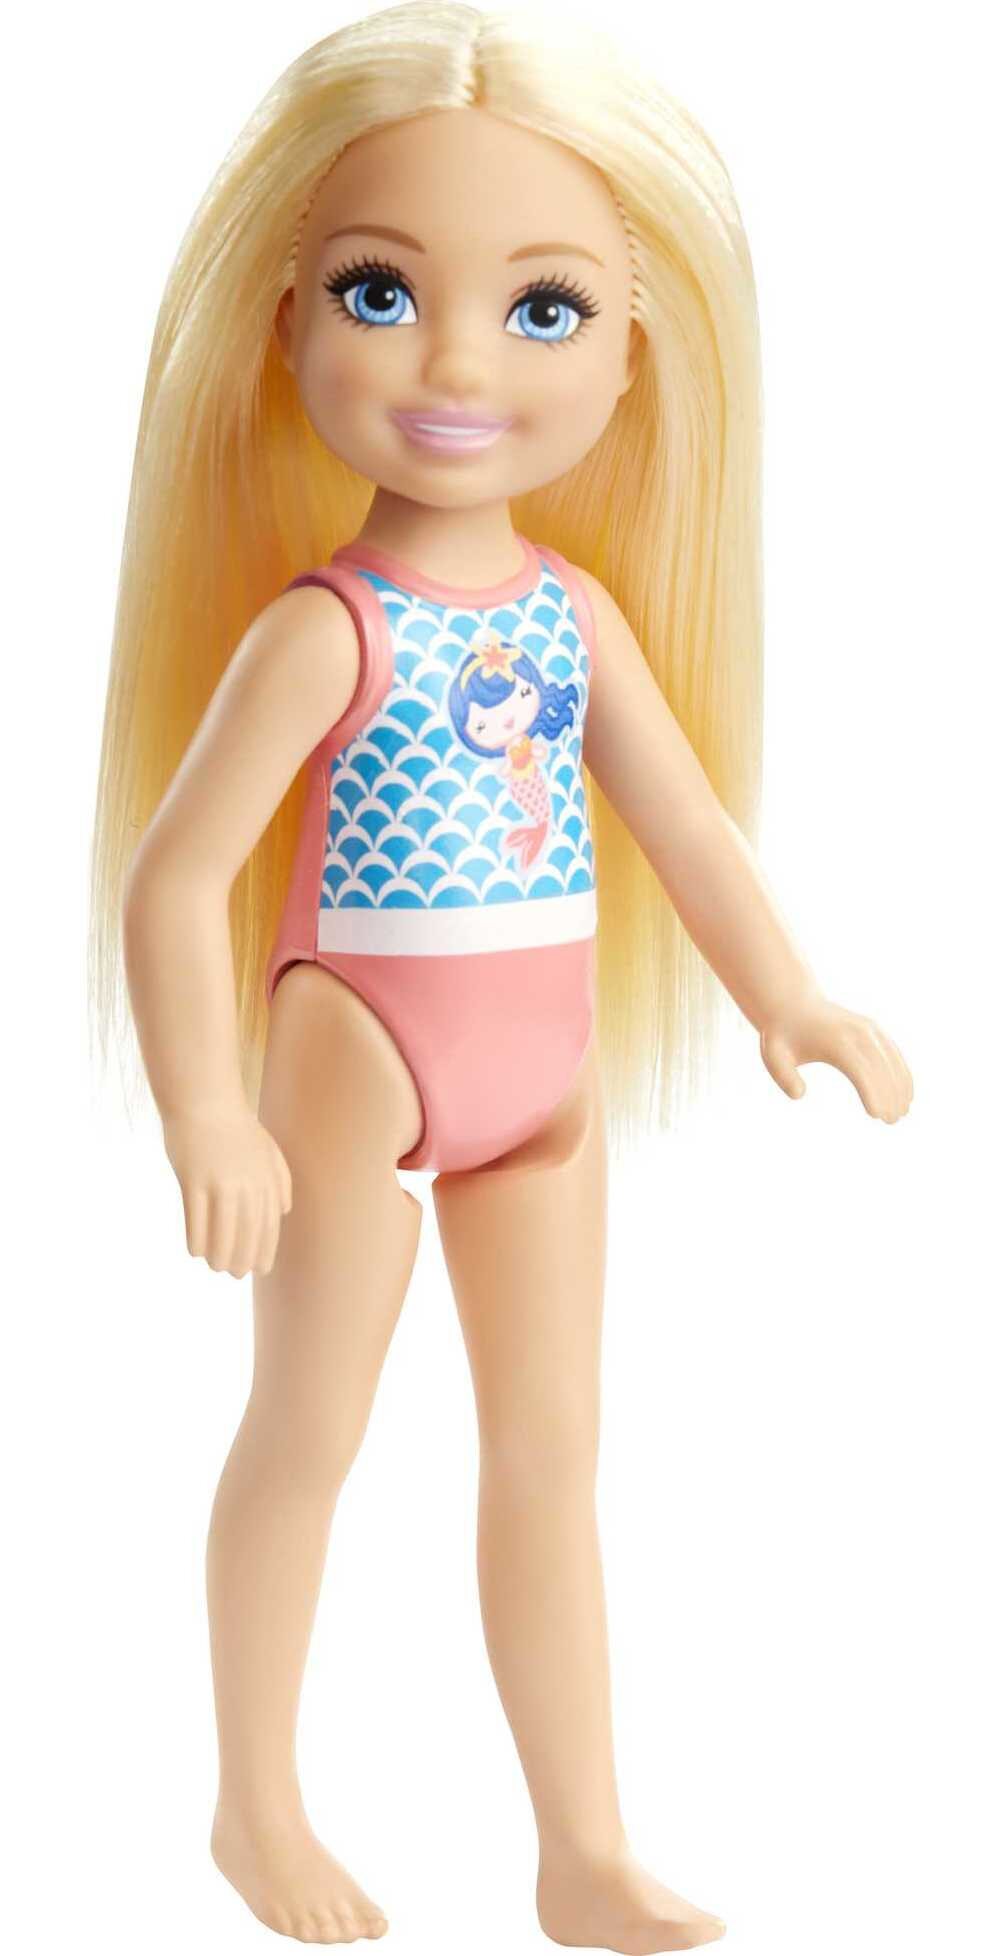 Barbie Club Chelsea Doll, Small Doll with Long Blonde Hair, Blue Eyes & Mermaid-Graphic Swimsuit - image 1 of 5